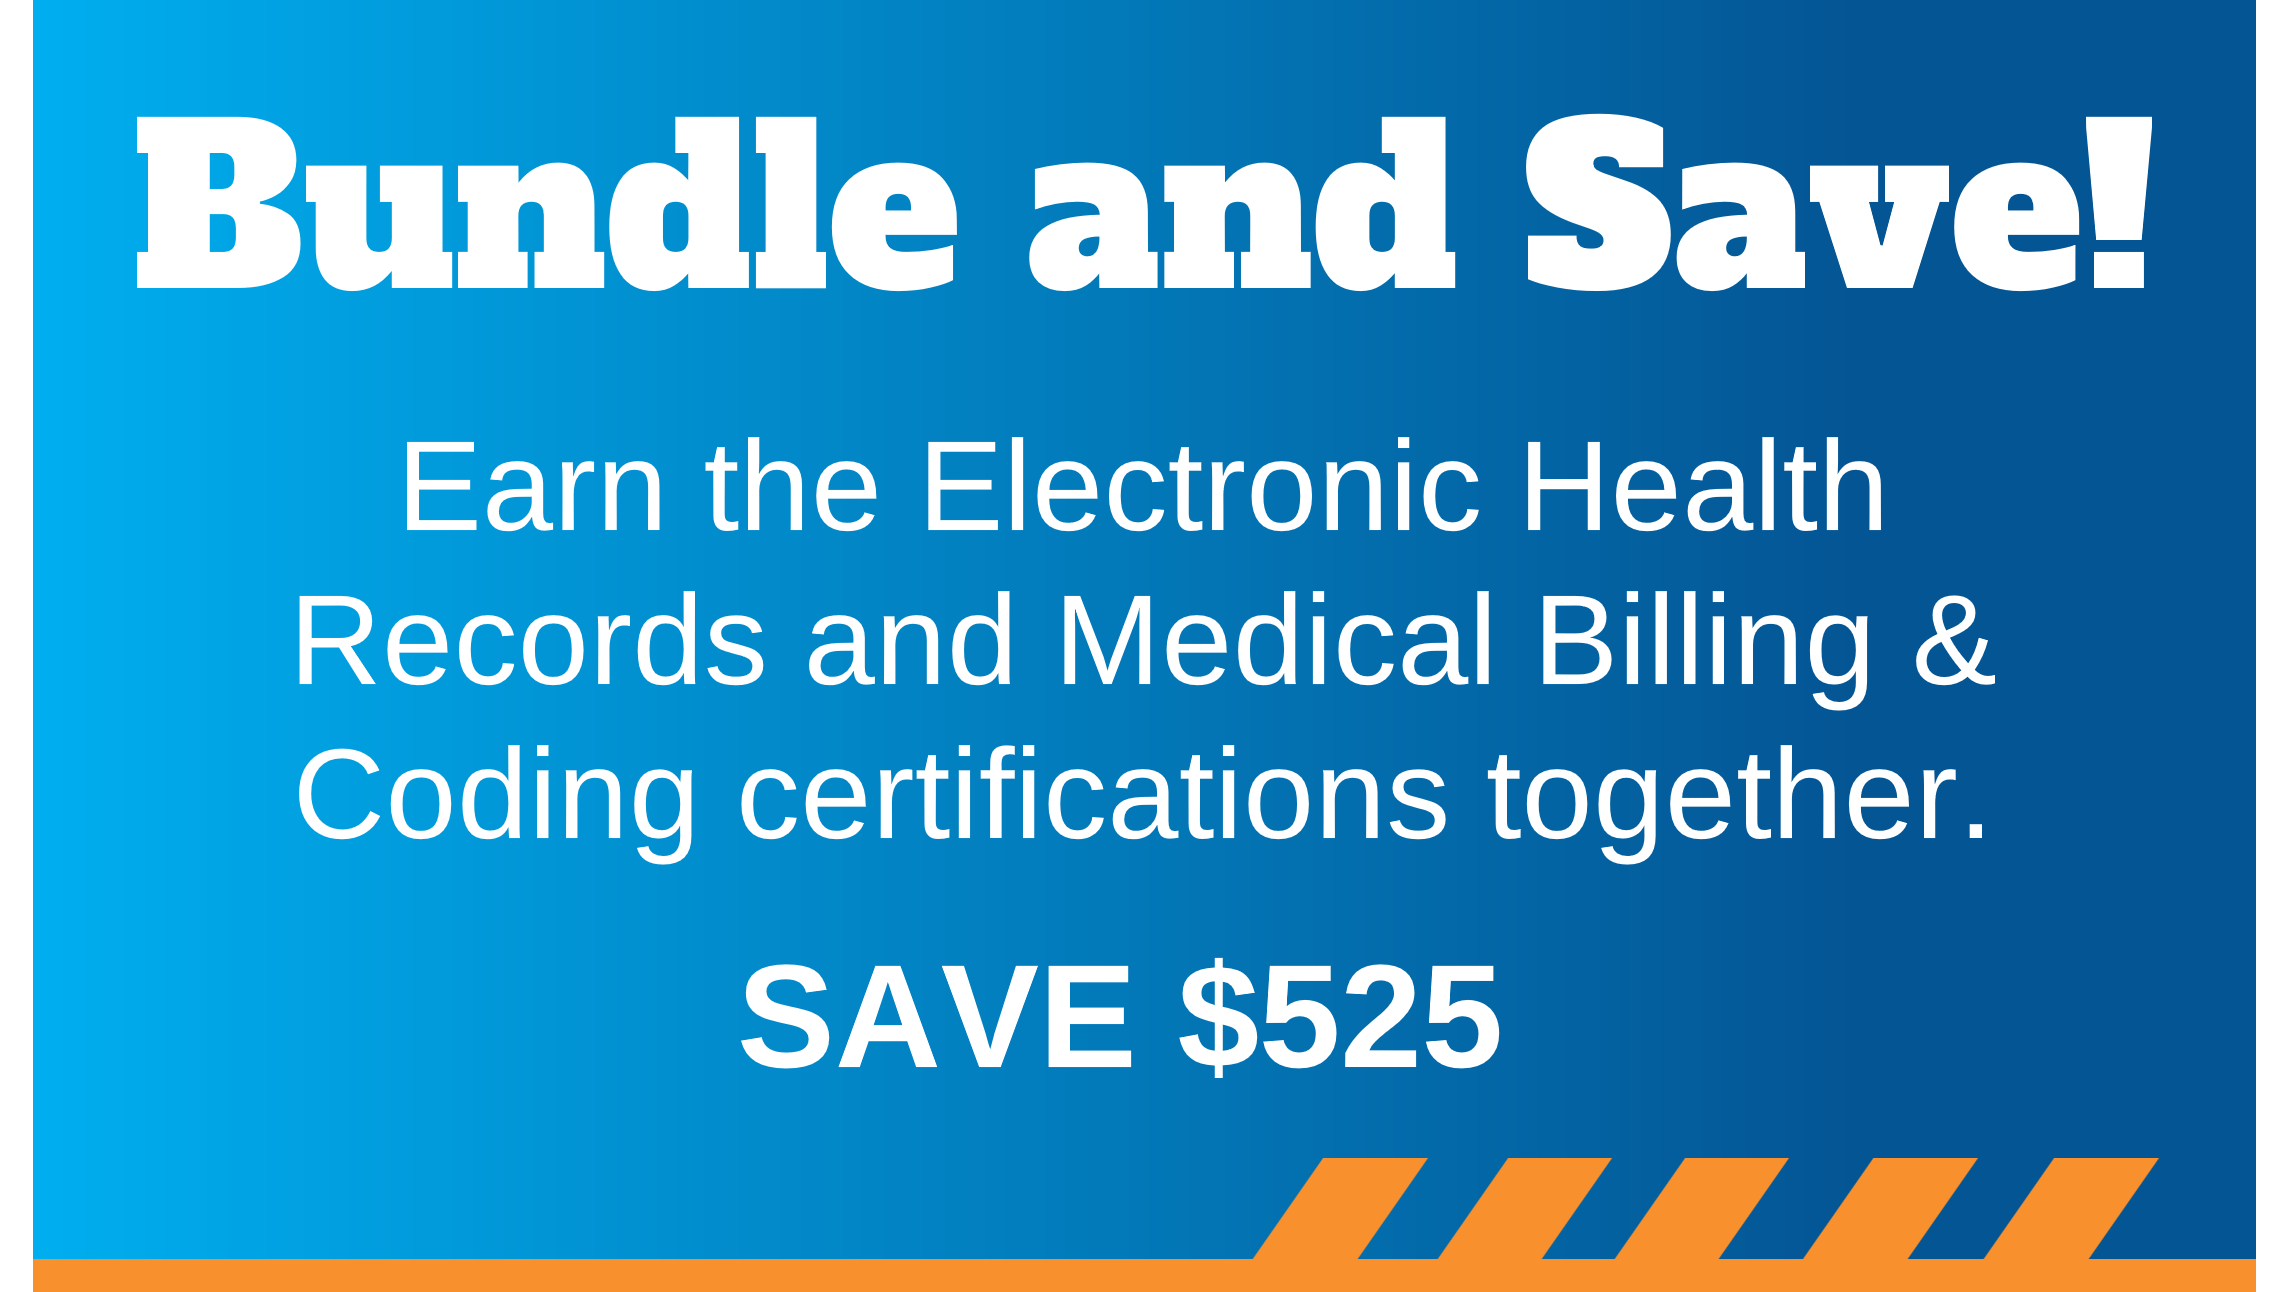 Earn the Electronic Health Records and Medical Billing & Coding certifications together to save $575